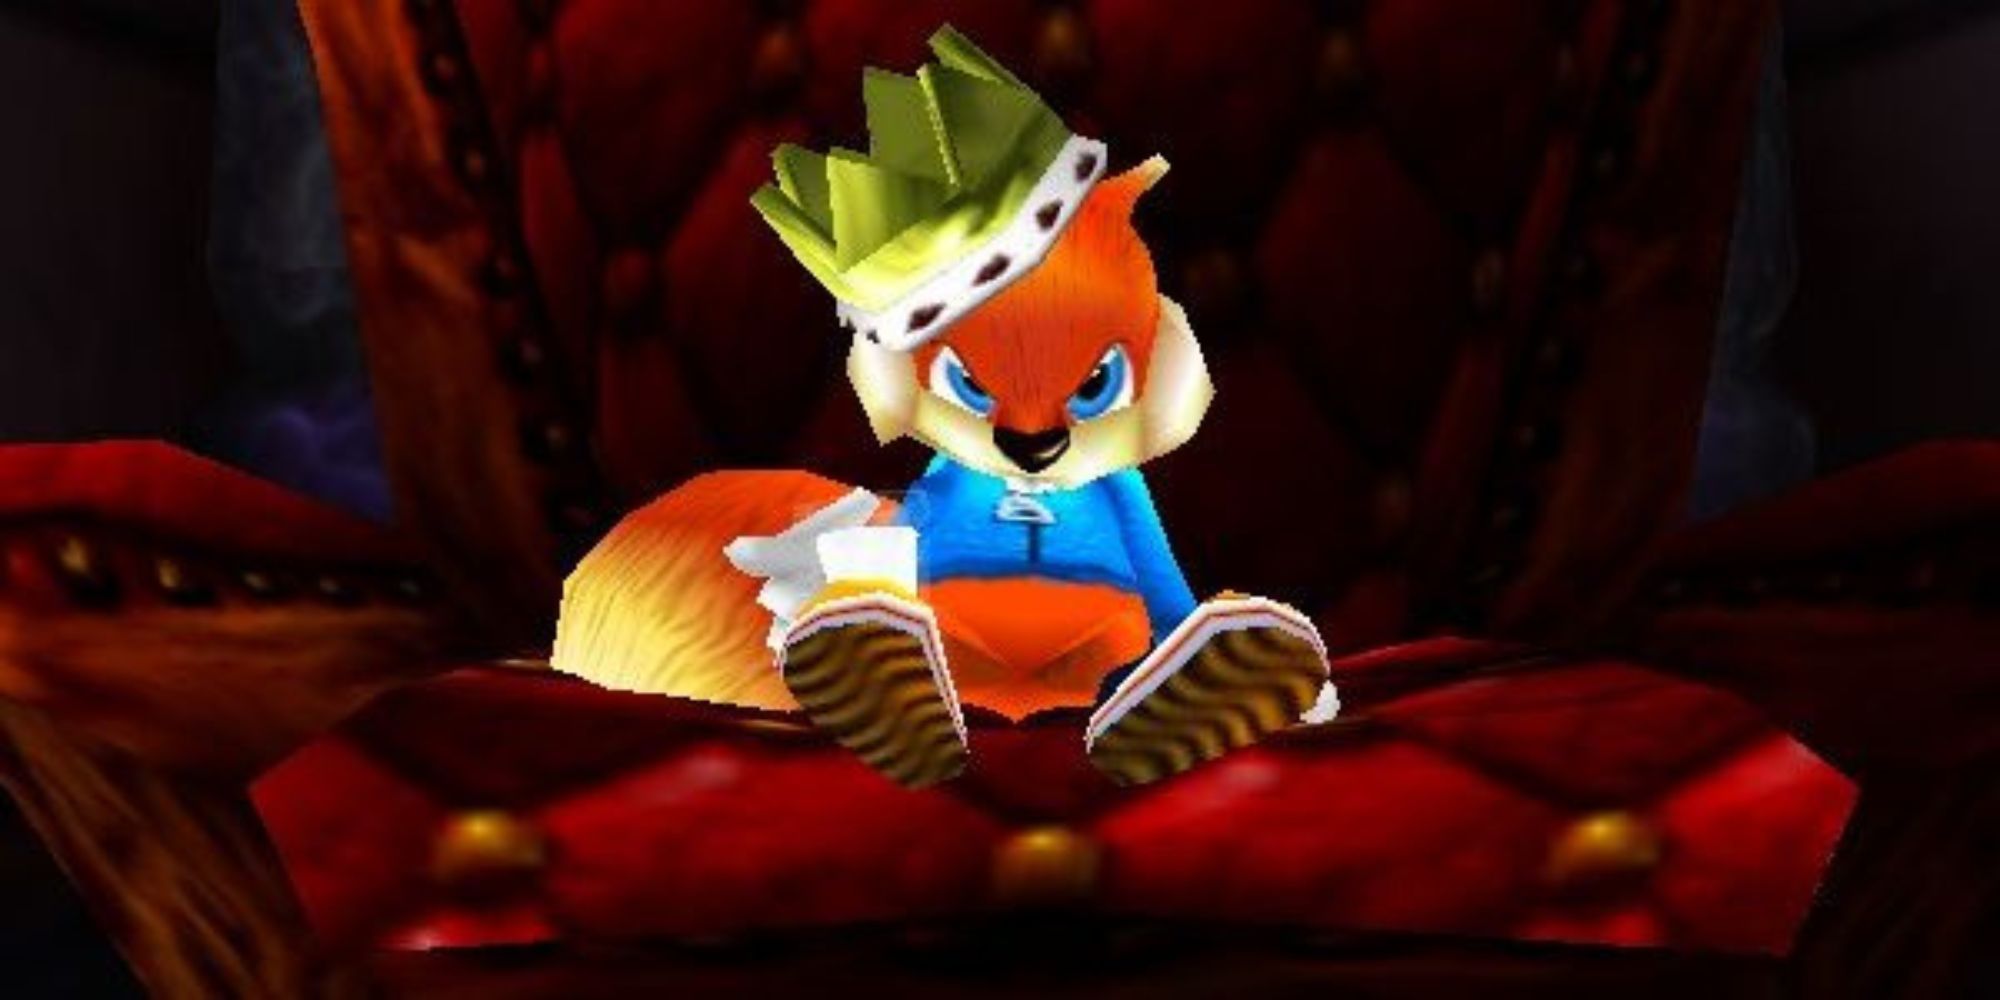 Conker sits on a big red chair with a crown on his head